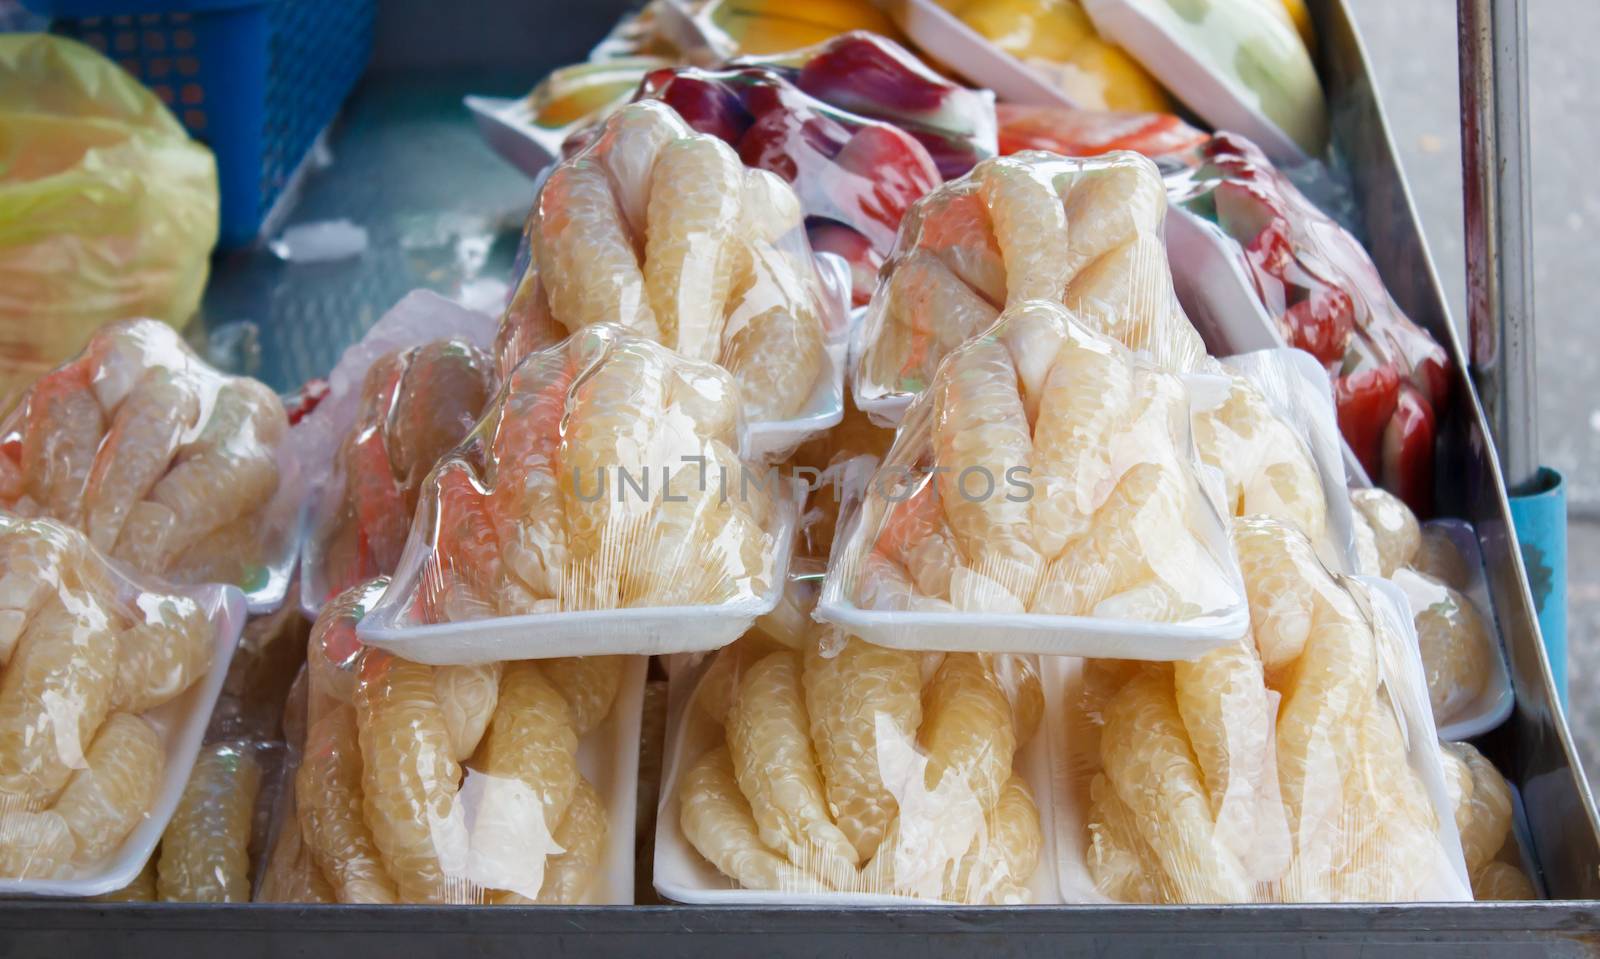 pomelo pieces in plastic wrap at market by vitawin